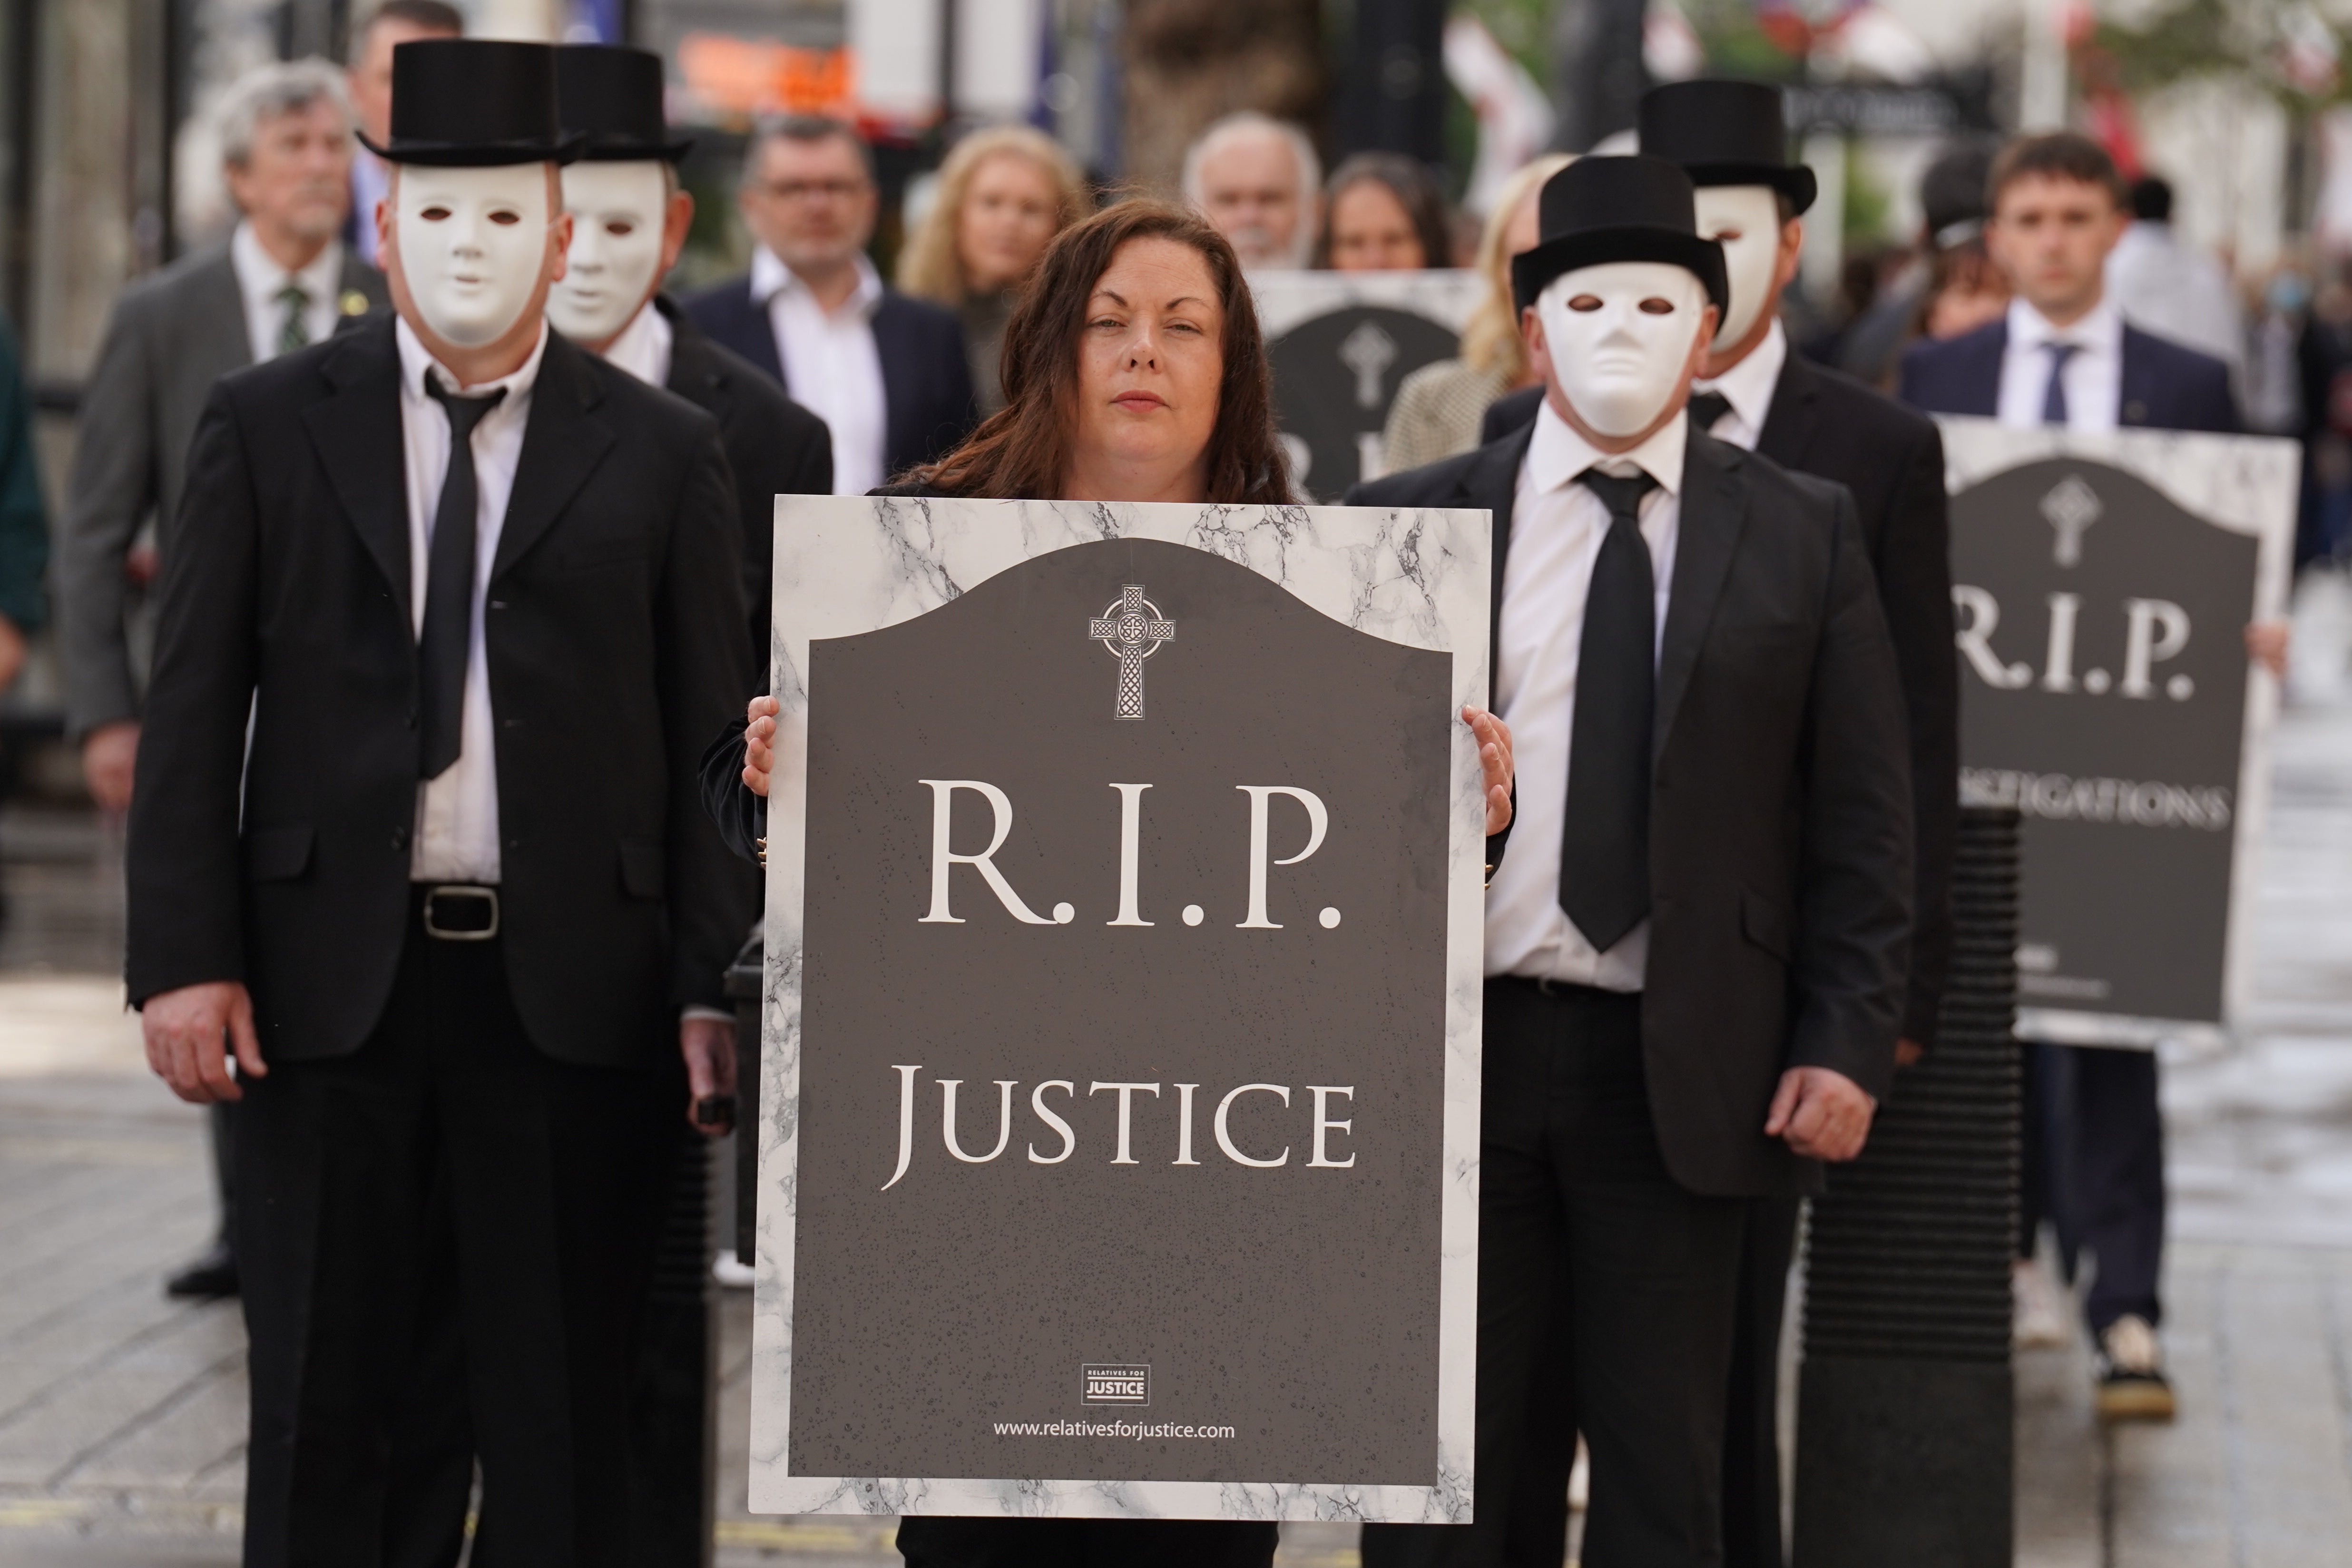 Representatives from Relatives for Justice protested in Westminster last month against the UK government’s introduction of controversial legacy legislation